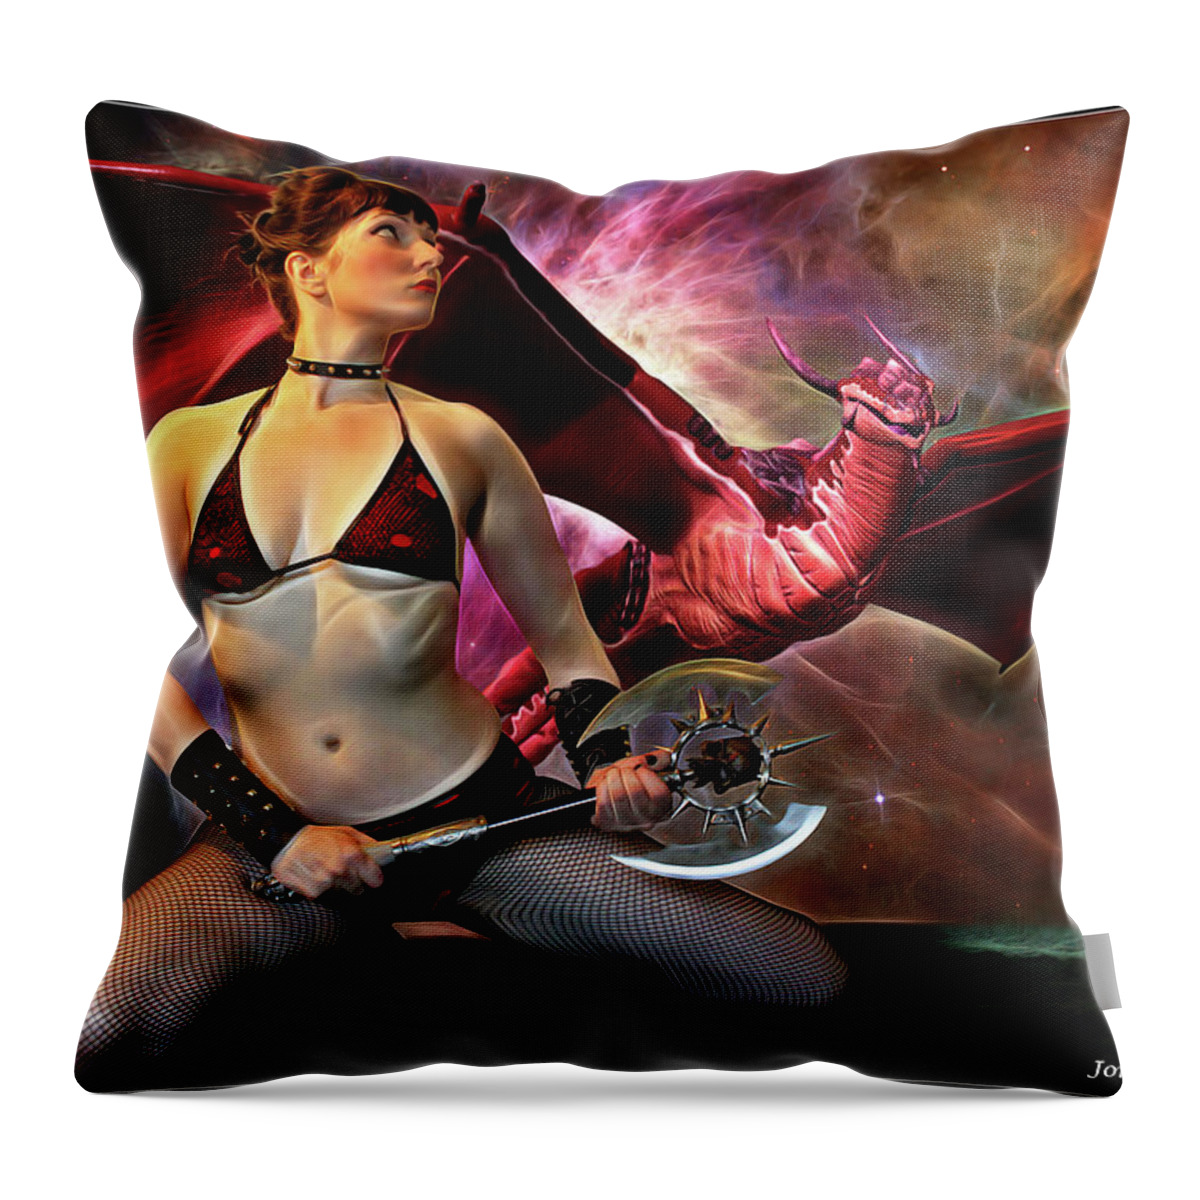 Dragon Throw Pillow featuring the photograph Nell And The Dragon by Jon Volden